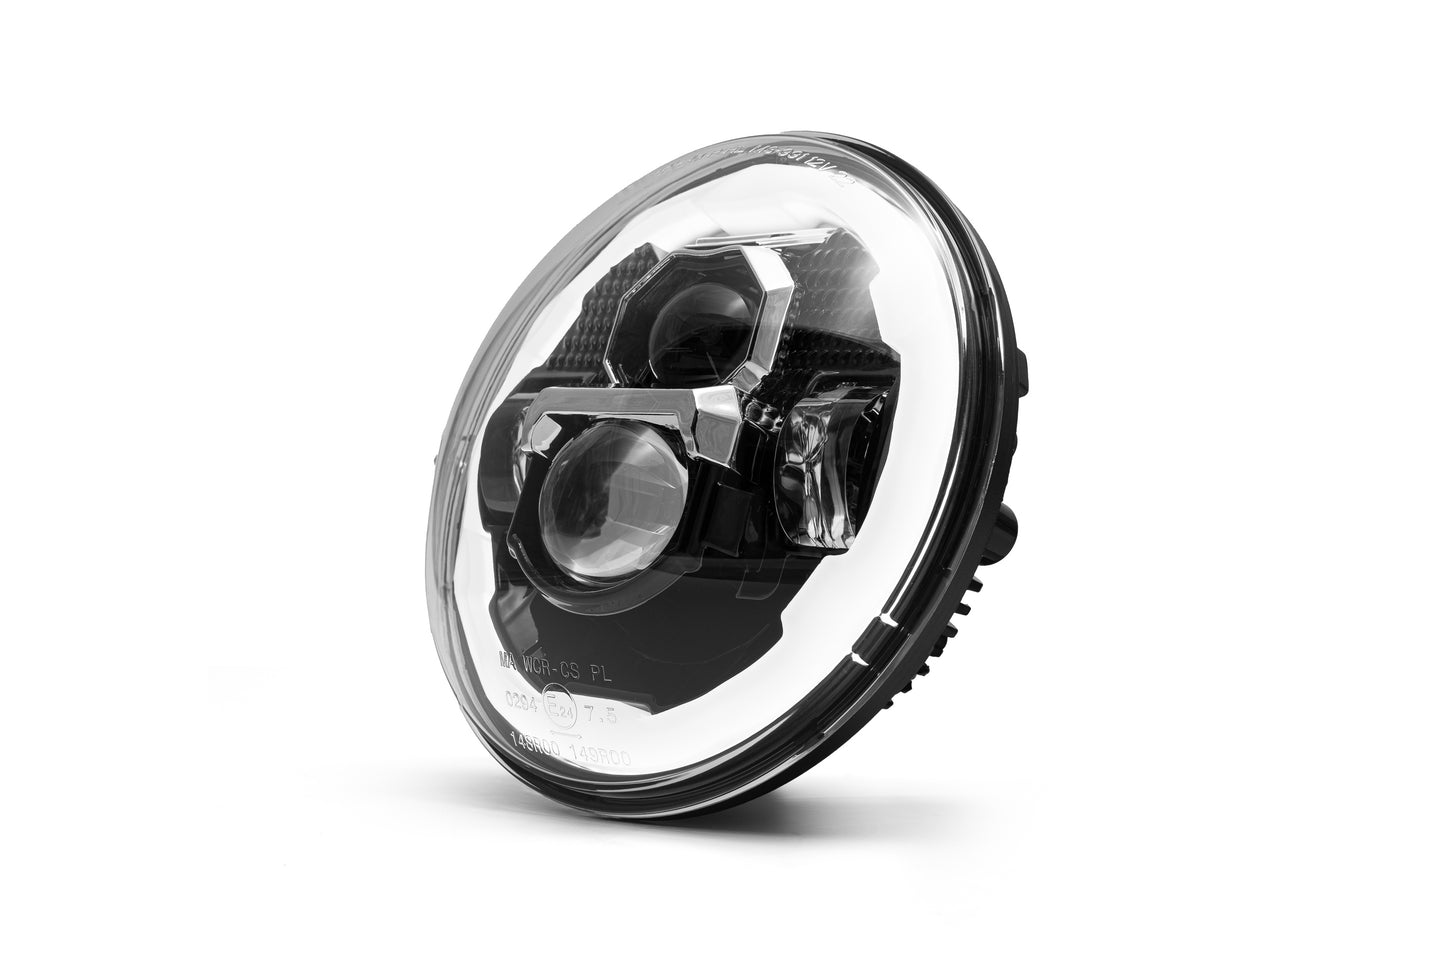 7" Headlight ECE Approved With Parking Light